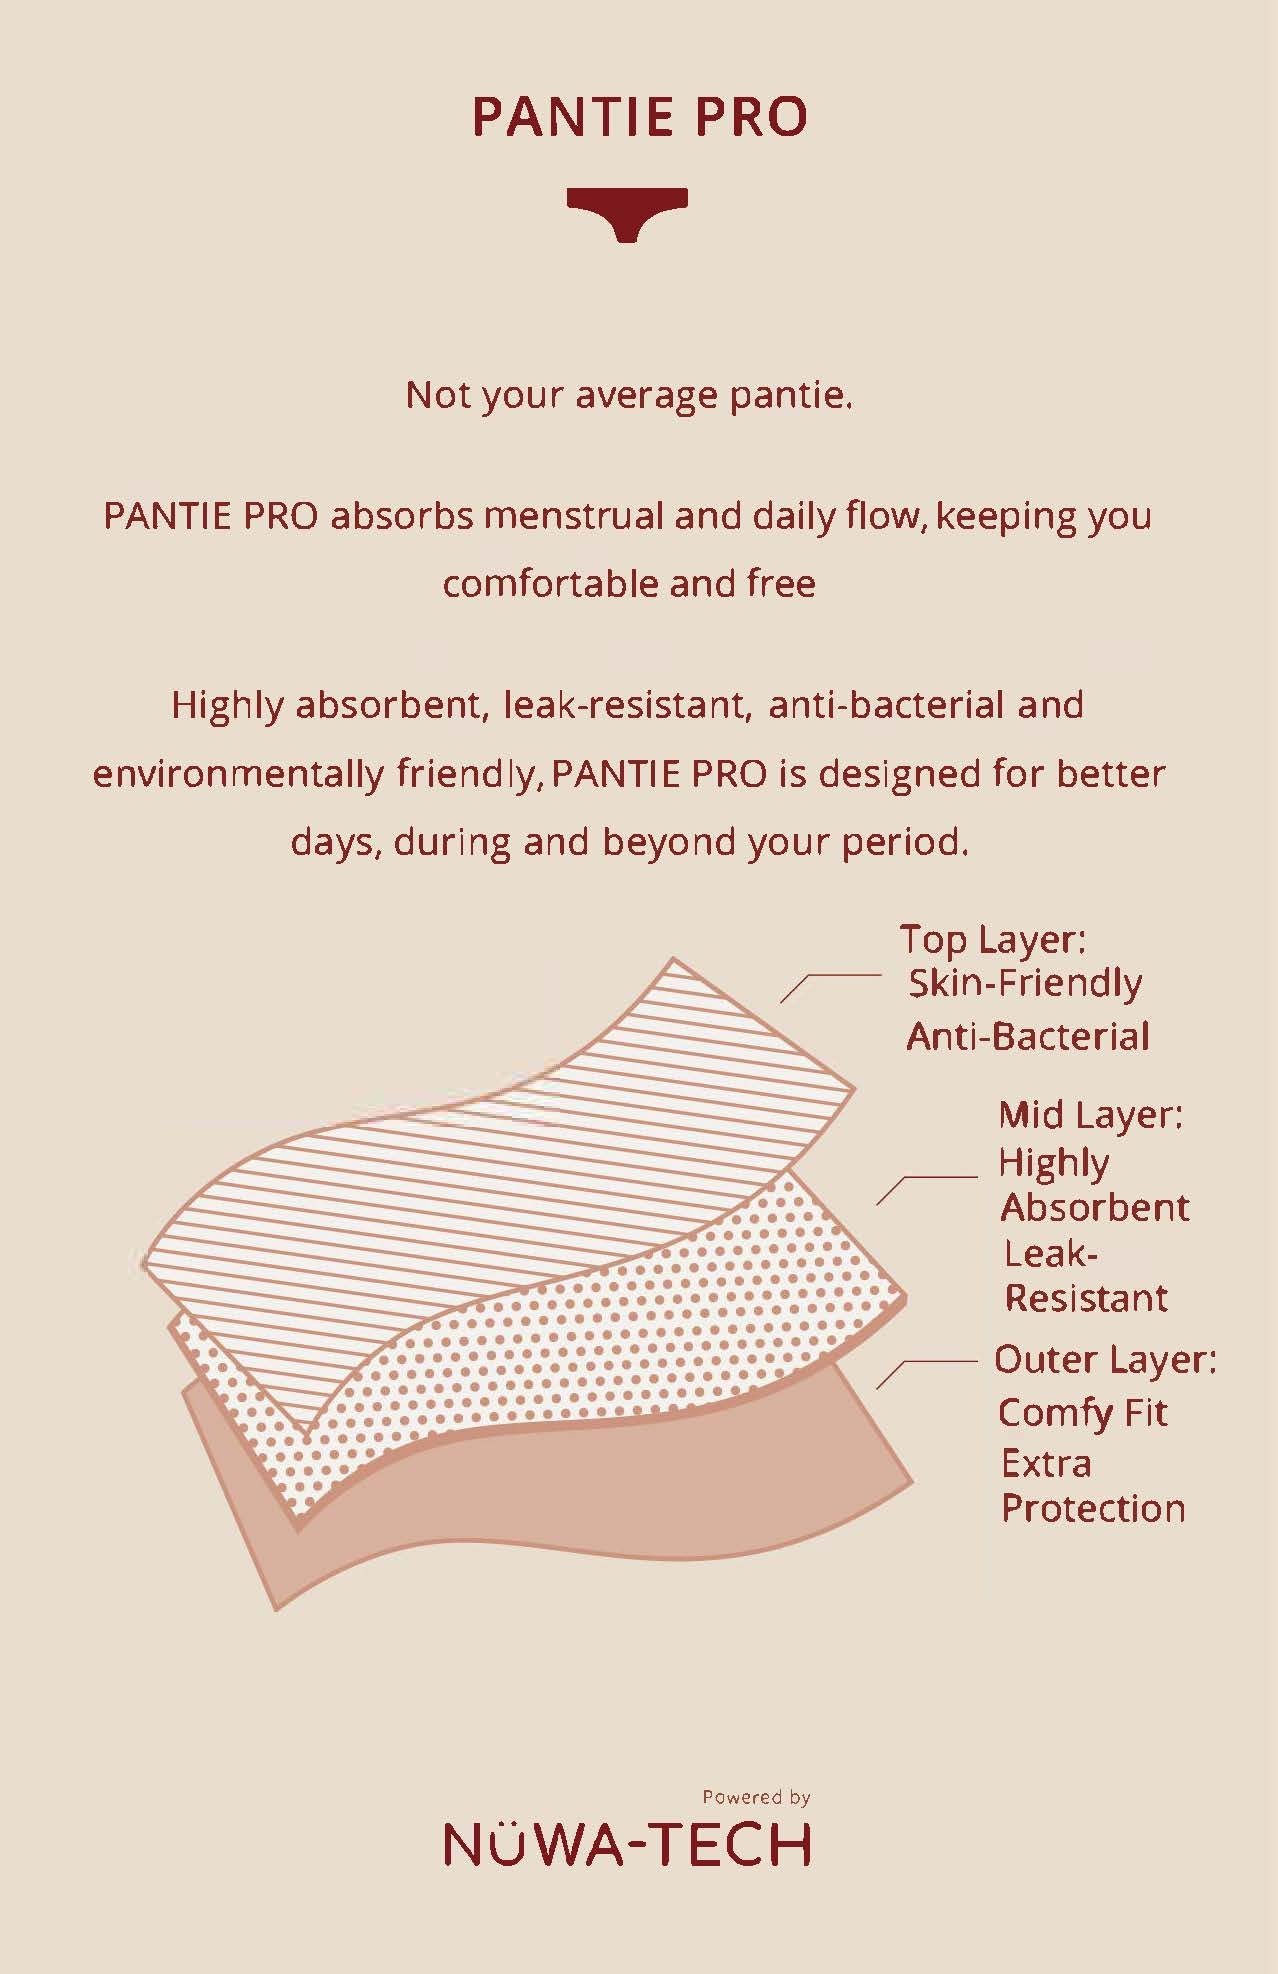 detail explanation of how Pantie Pro works